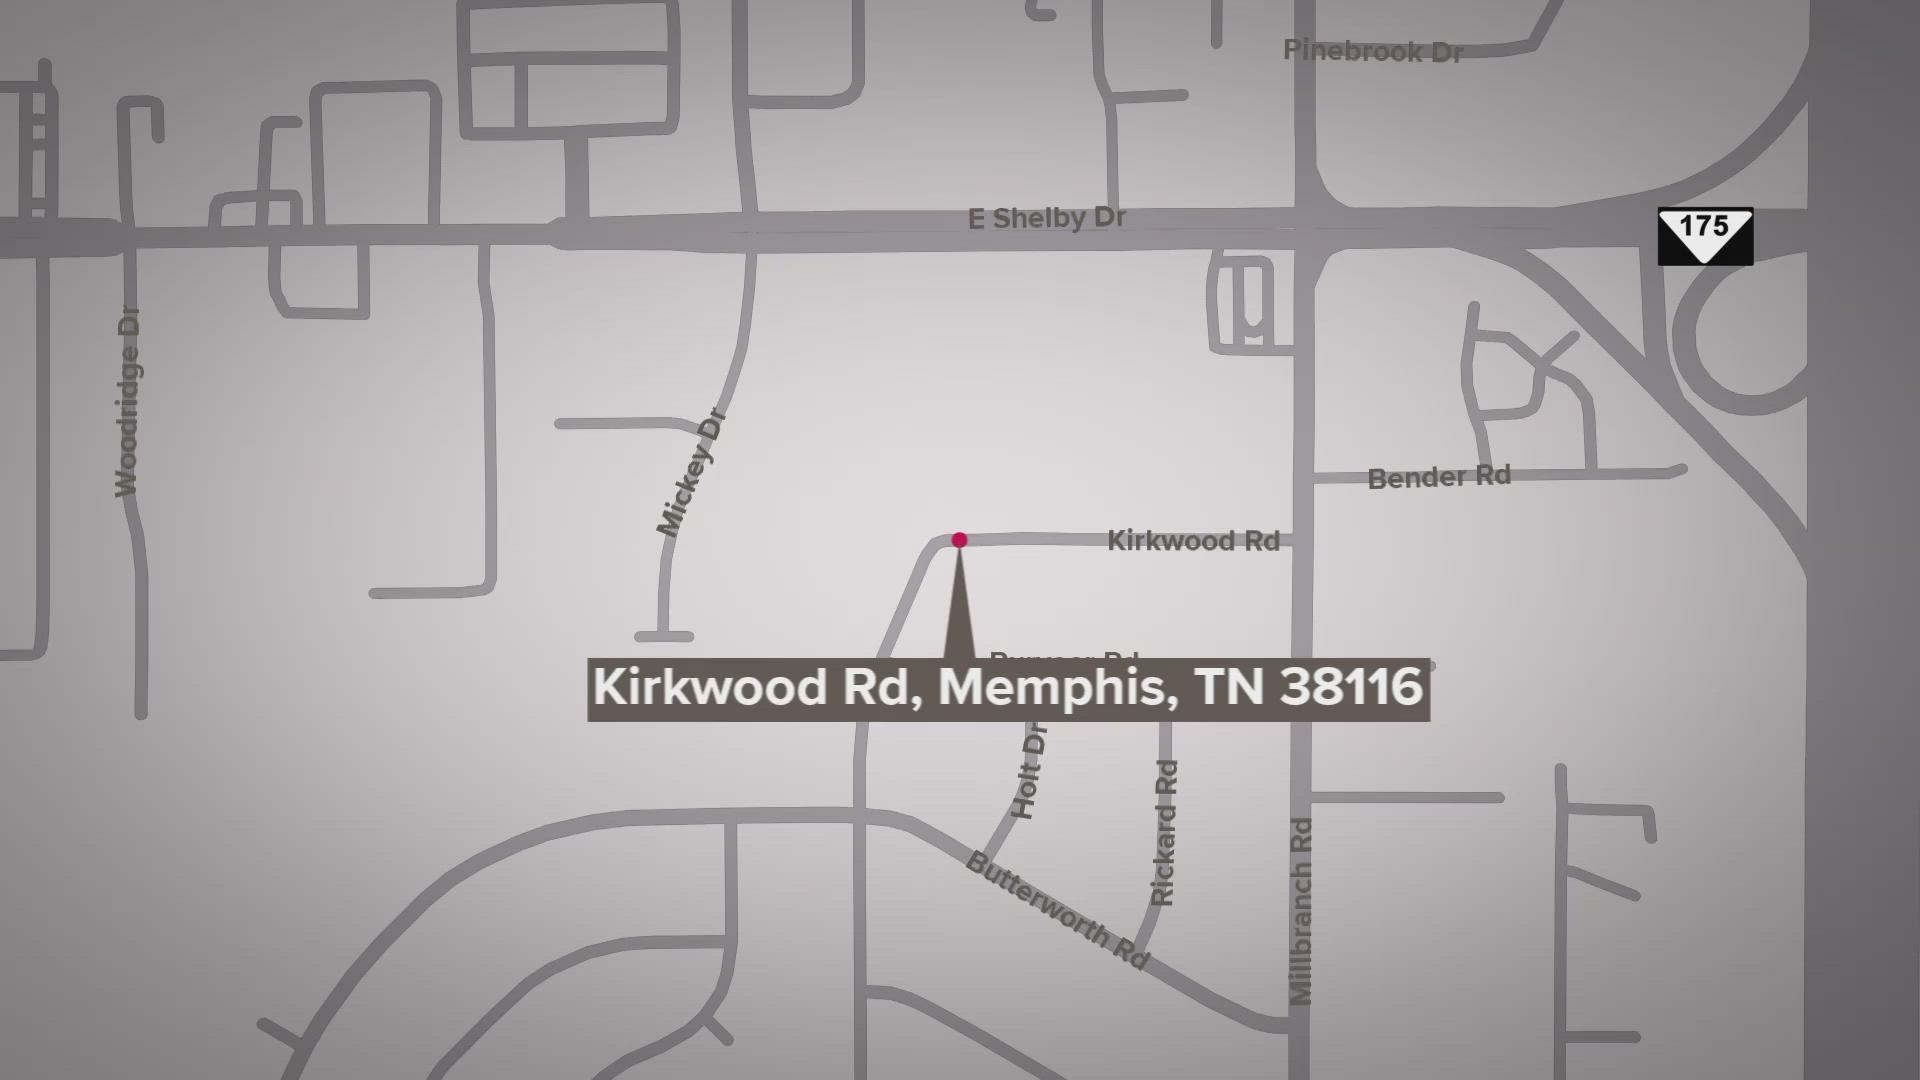 MPD officers were called to the 1600 block of Kirkwood Rd, just west of Millbranch Rd., just after 12:15 a.m. Friday, Feb. 10.